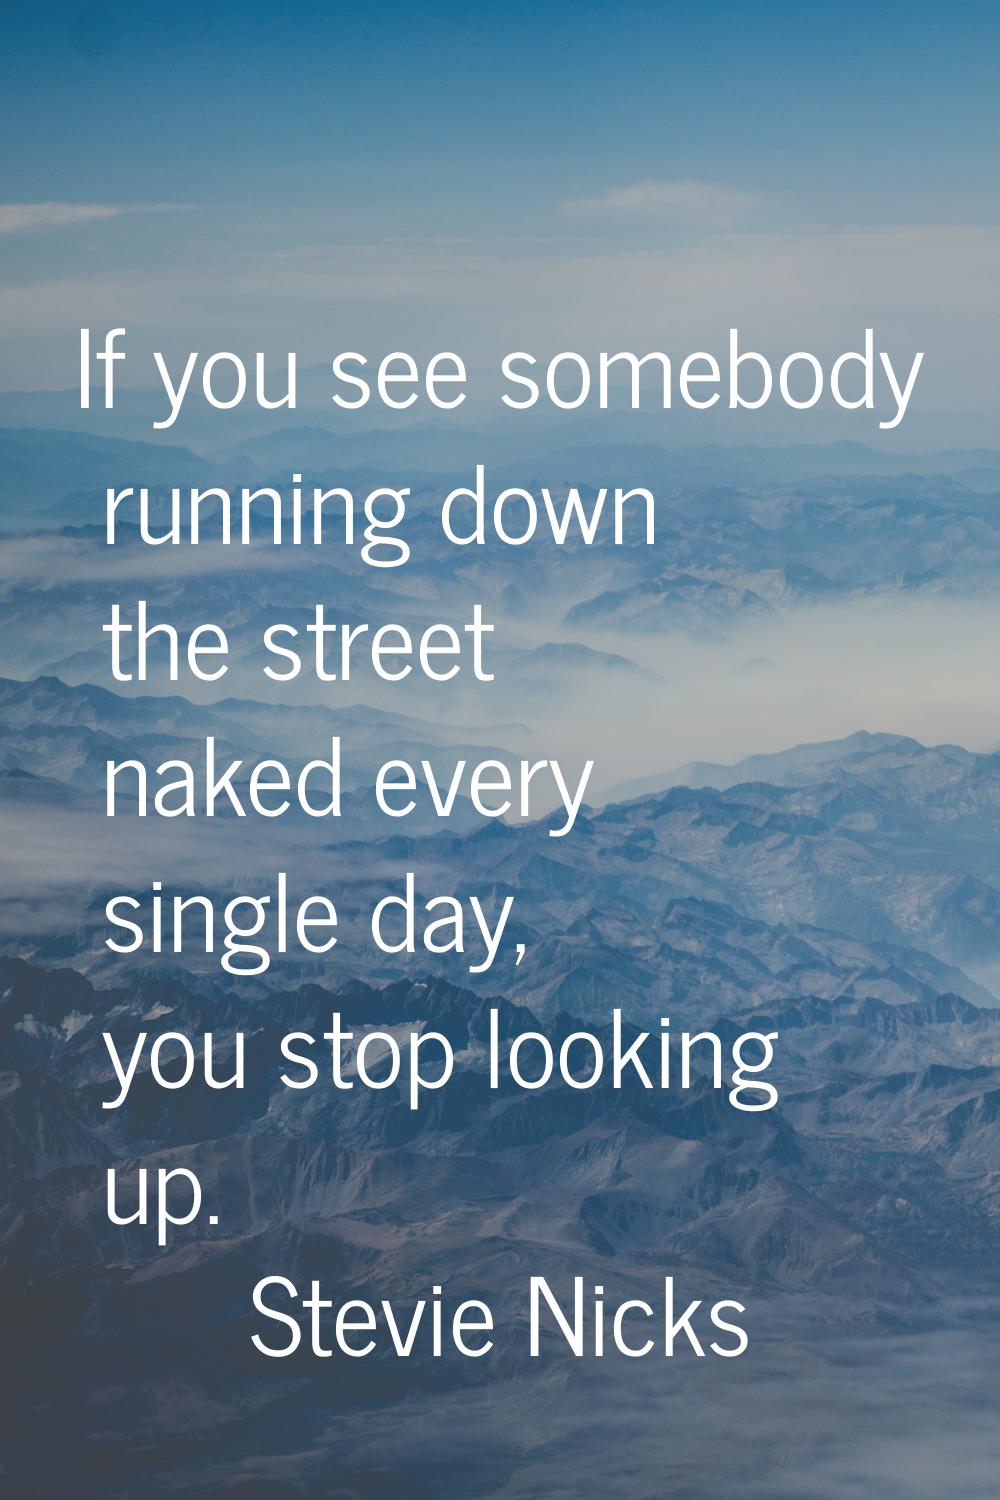 If you see somebody running down the street naked every single day, you stop looking up.